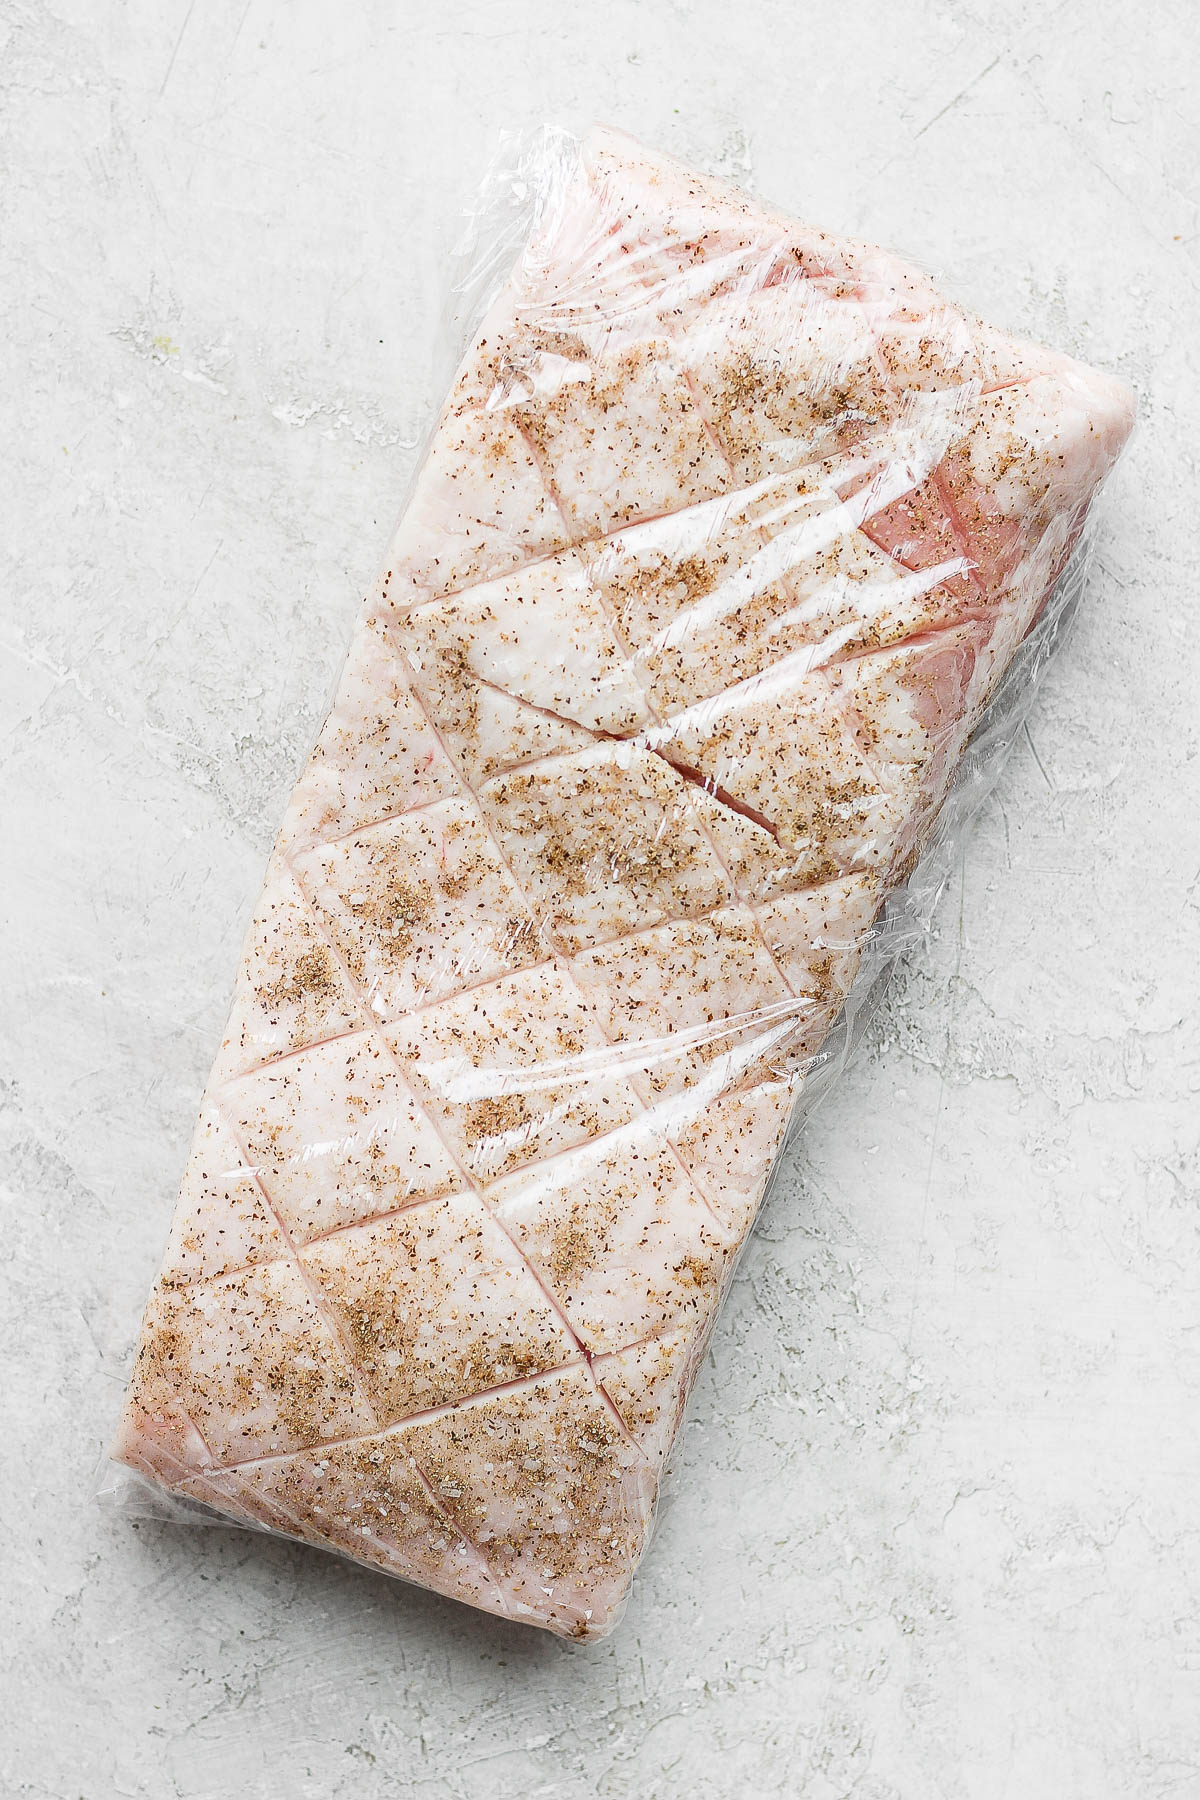 A piece of pork belly scored, rubbed with seasoning and wrapped plastic wrap. 